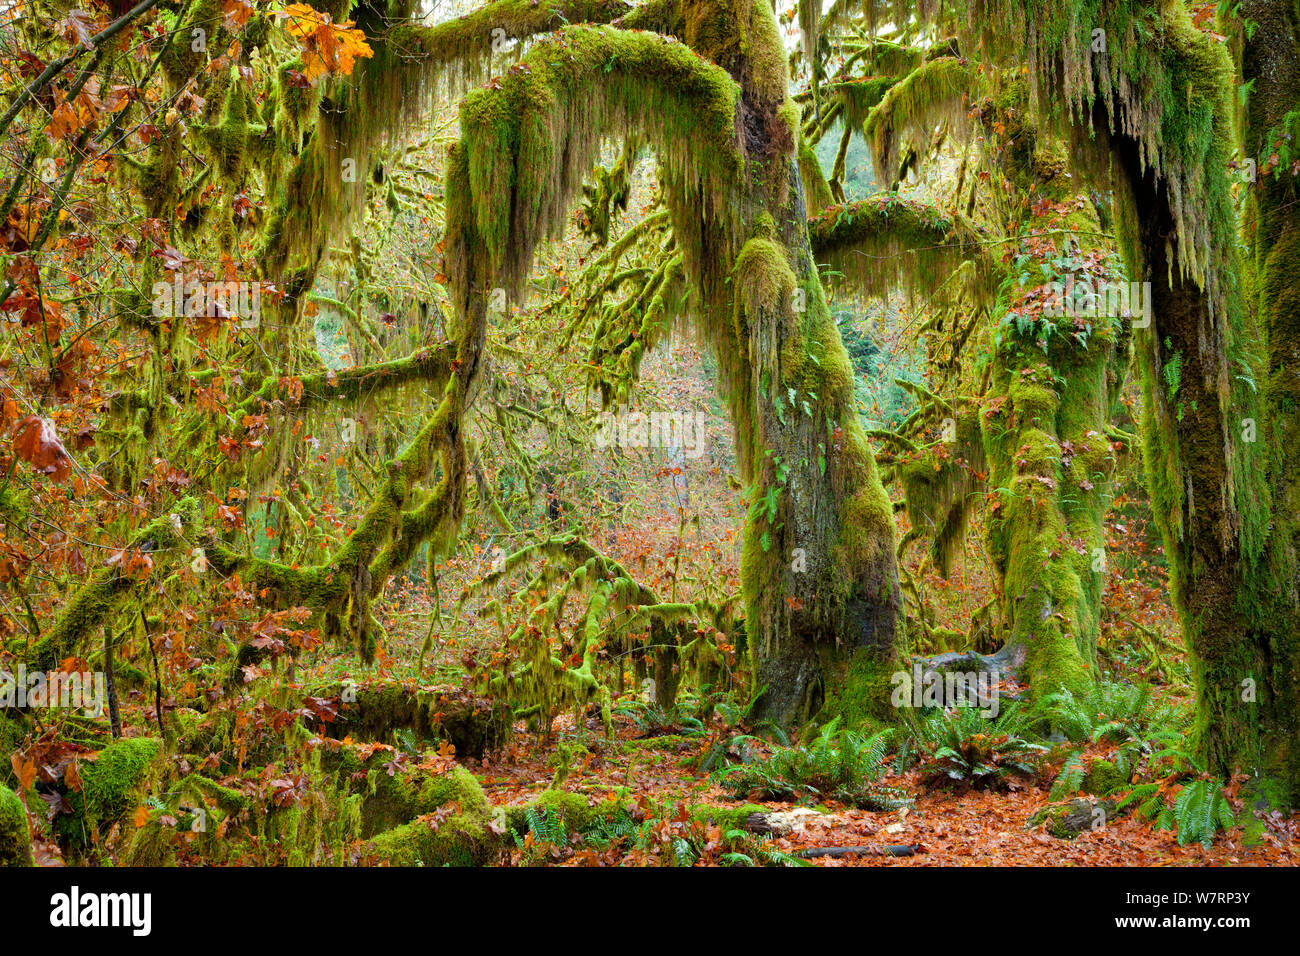 Mossy beards hang from these big leaf maple trees (Acer macrophyllum) in the Hall of Mosses section of the Hoh Rainforest in  Olympic National Park. Washington. USA. November 2012 Stock Photo